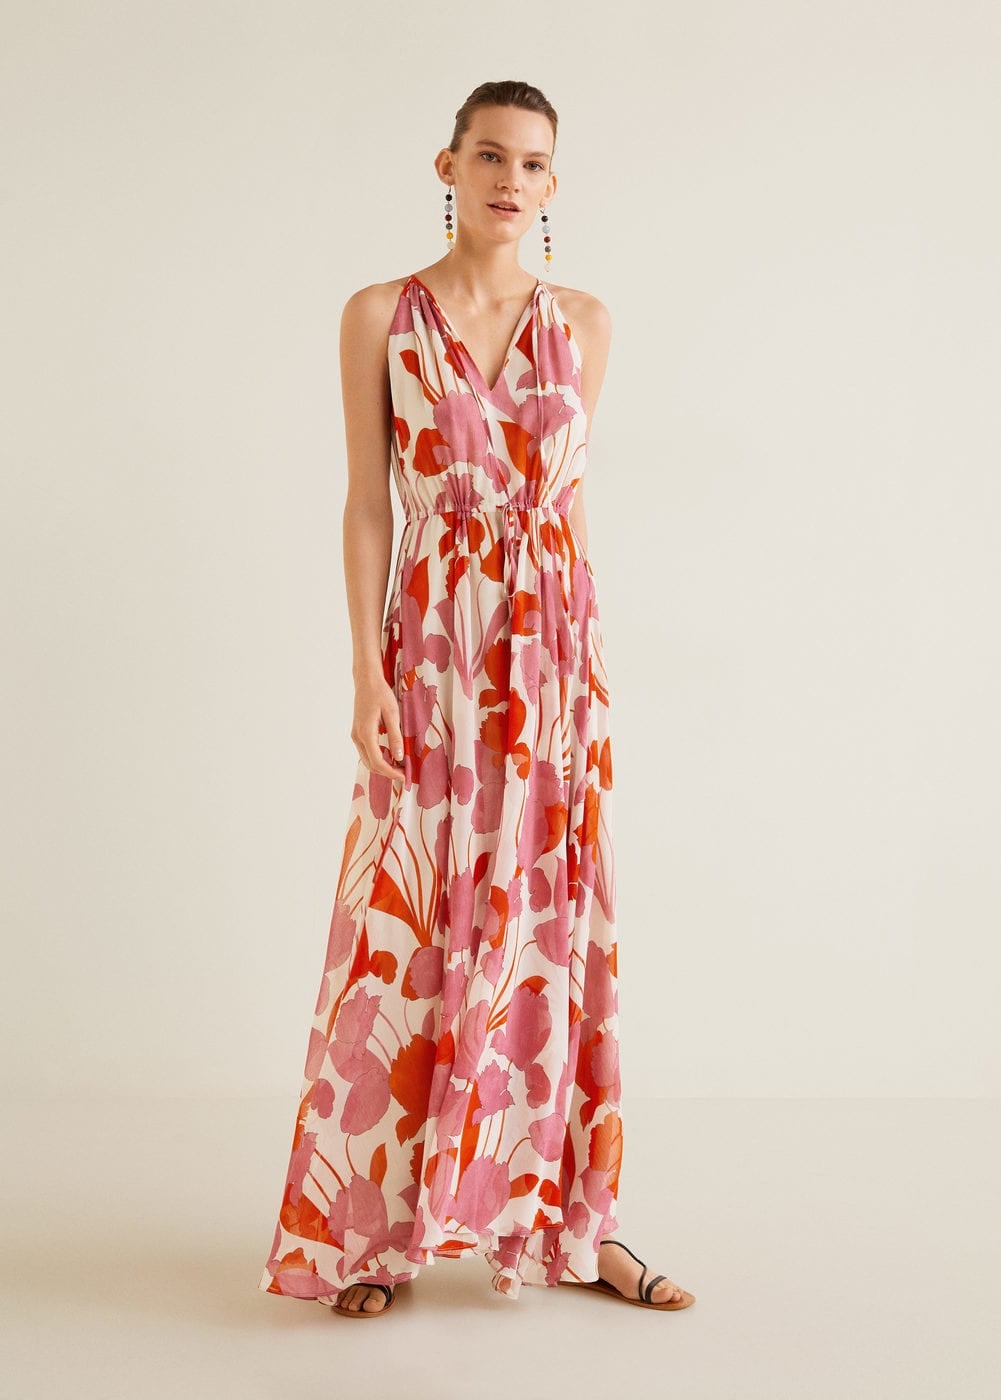 Mango Printed Long Dress | to Steal The Spotlight or Anything, but These Under-$150 Wedding Guest Dresses Are So Gorgeous | POPSUGAR Fashion Photo 19